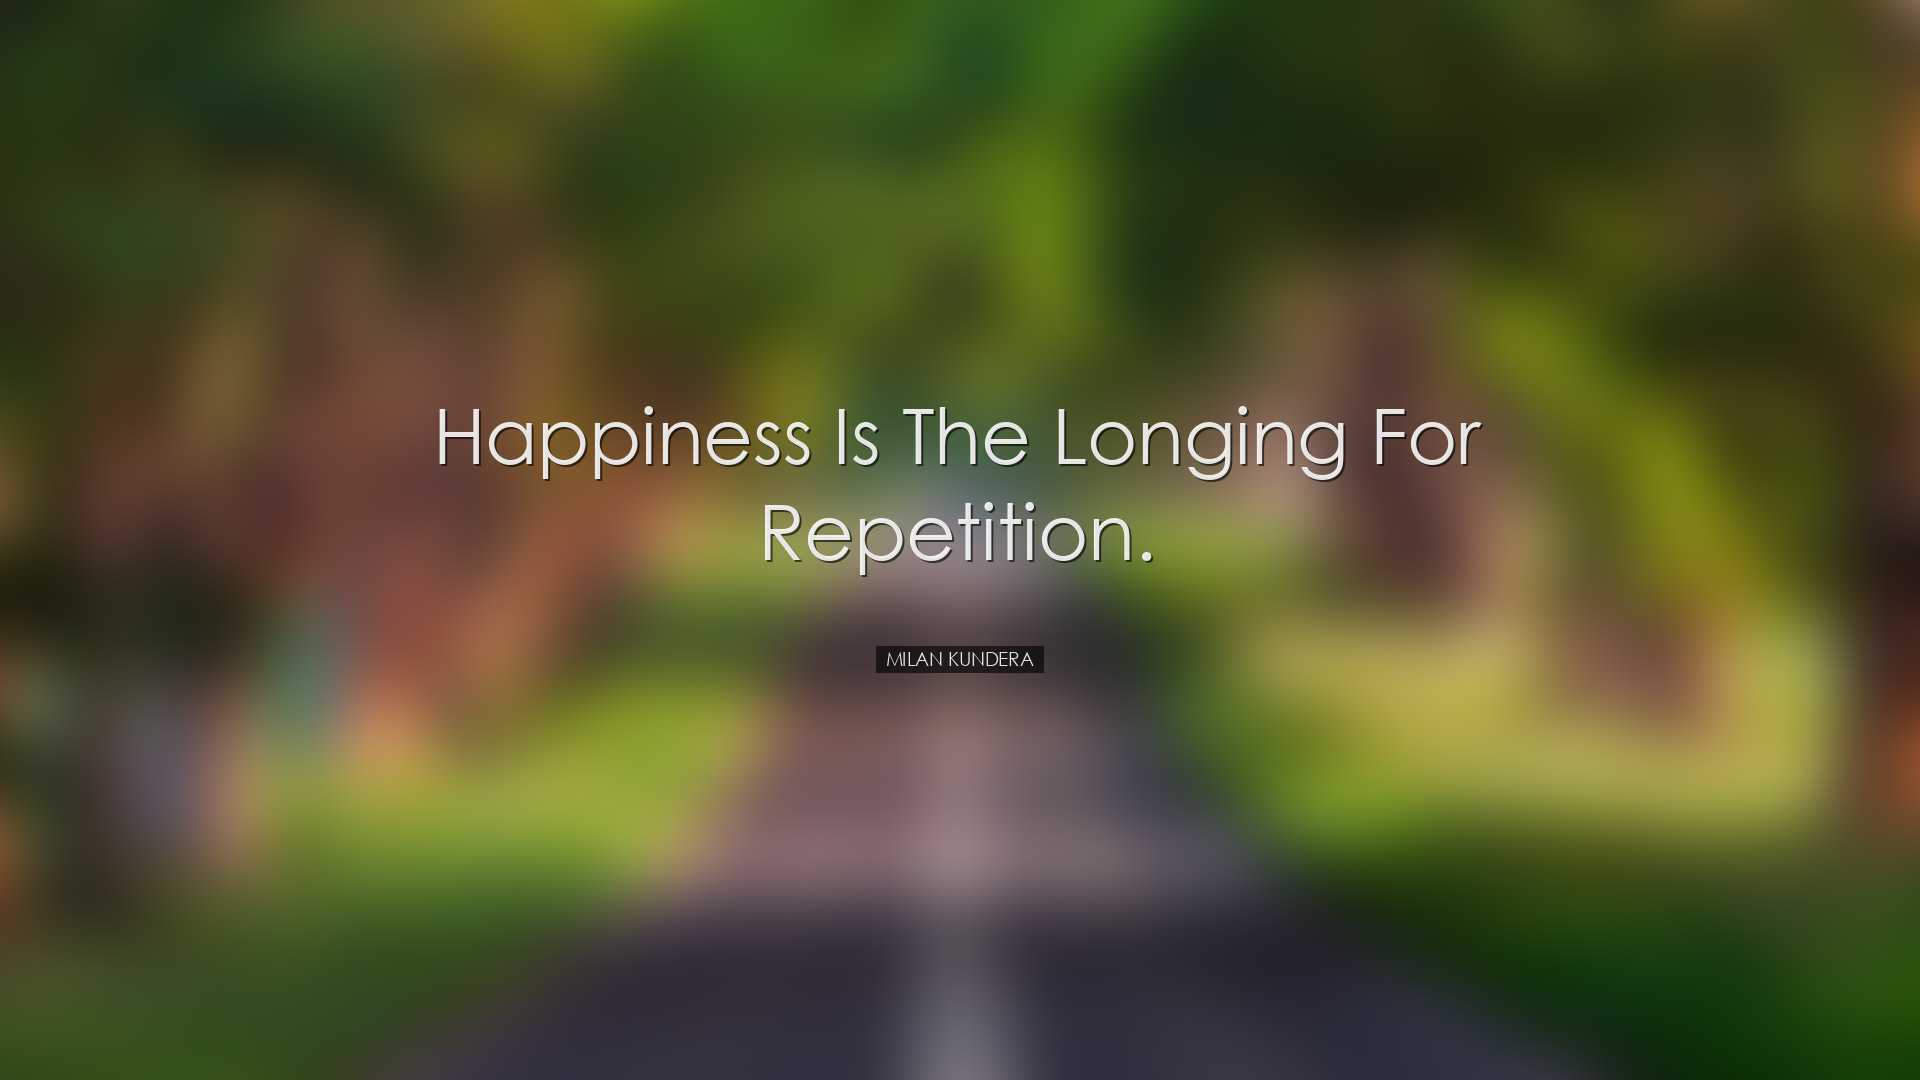 Happiness is the longing for repetition. - Milan Kundera